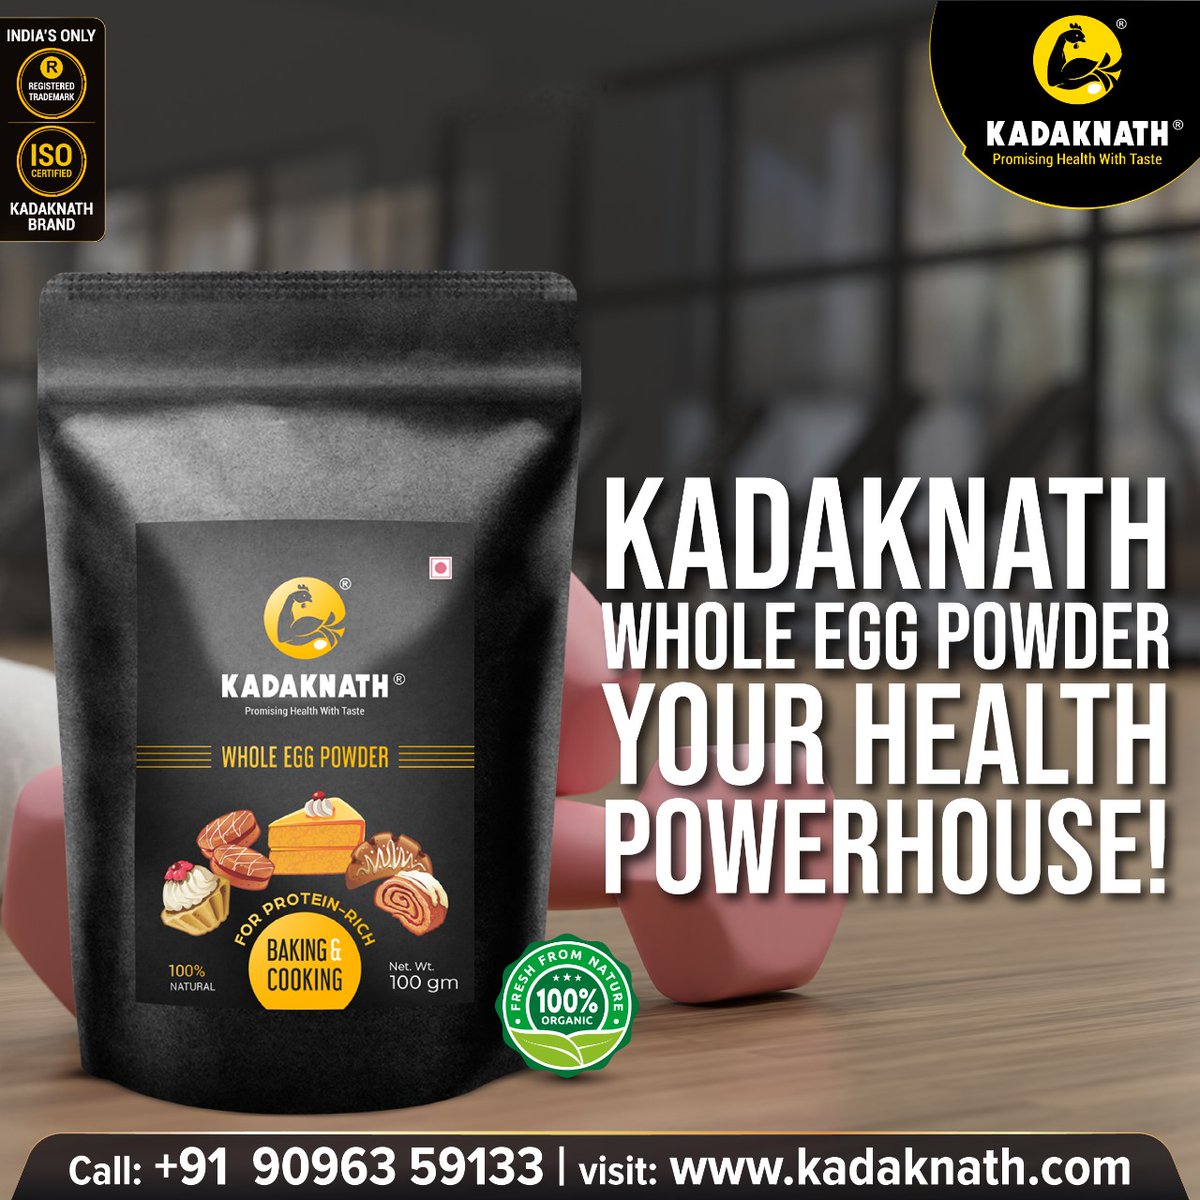 Baking and Cooking is now more easy with Kadaknath Whole Egg Powder,
No greasy hands, No more mess...

Contact us at 9096359133

#kadaknath #kadaknatheggs #kadaknatheggpowder #healthy #nutrition #bakinglove #cookingwithlove #HealthyCooking